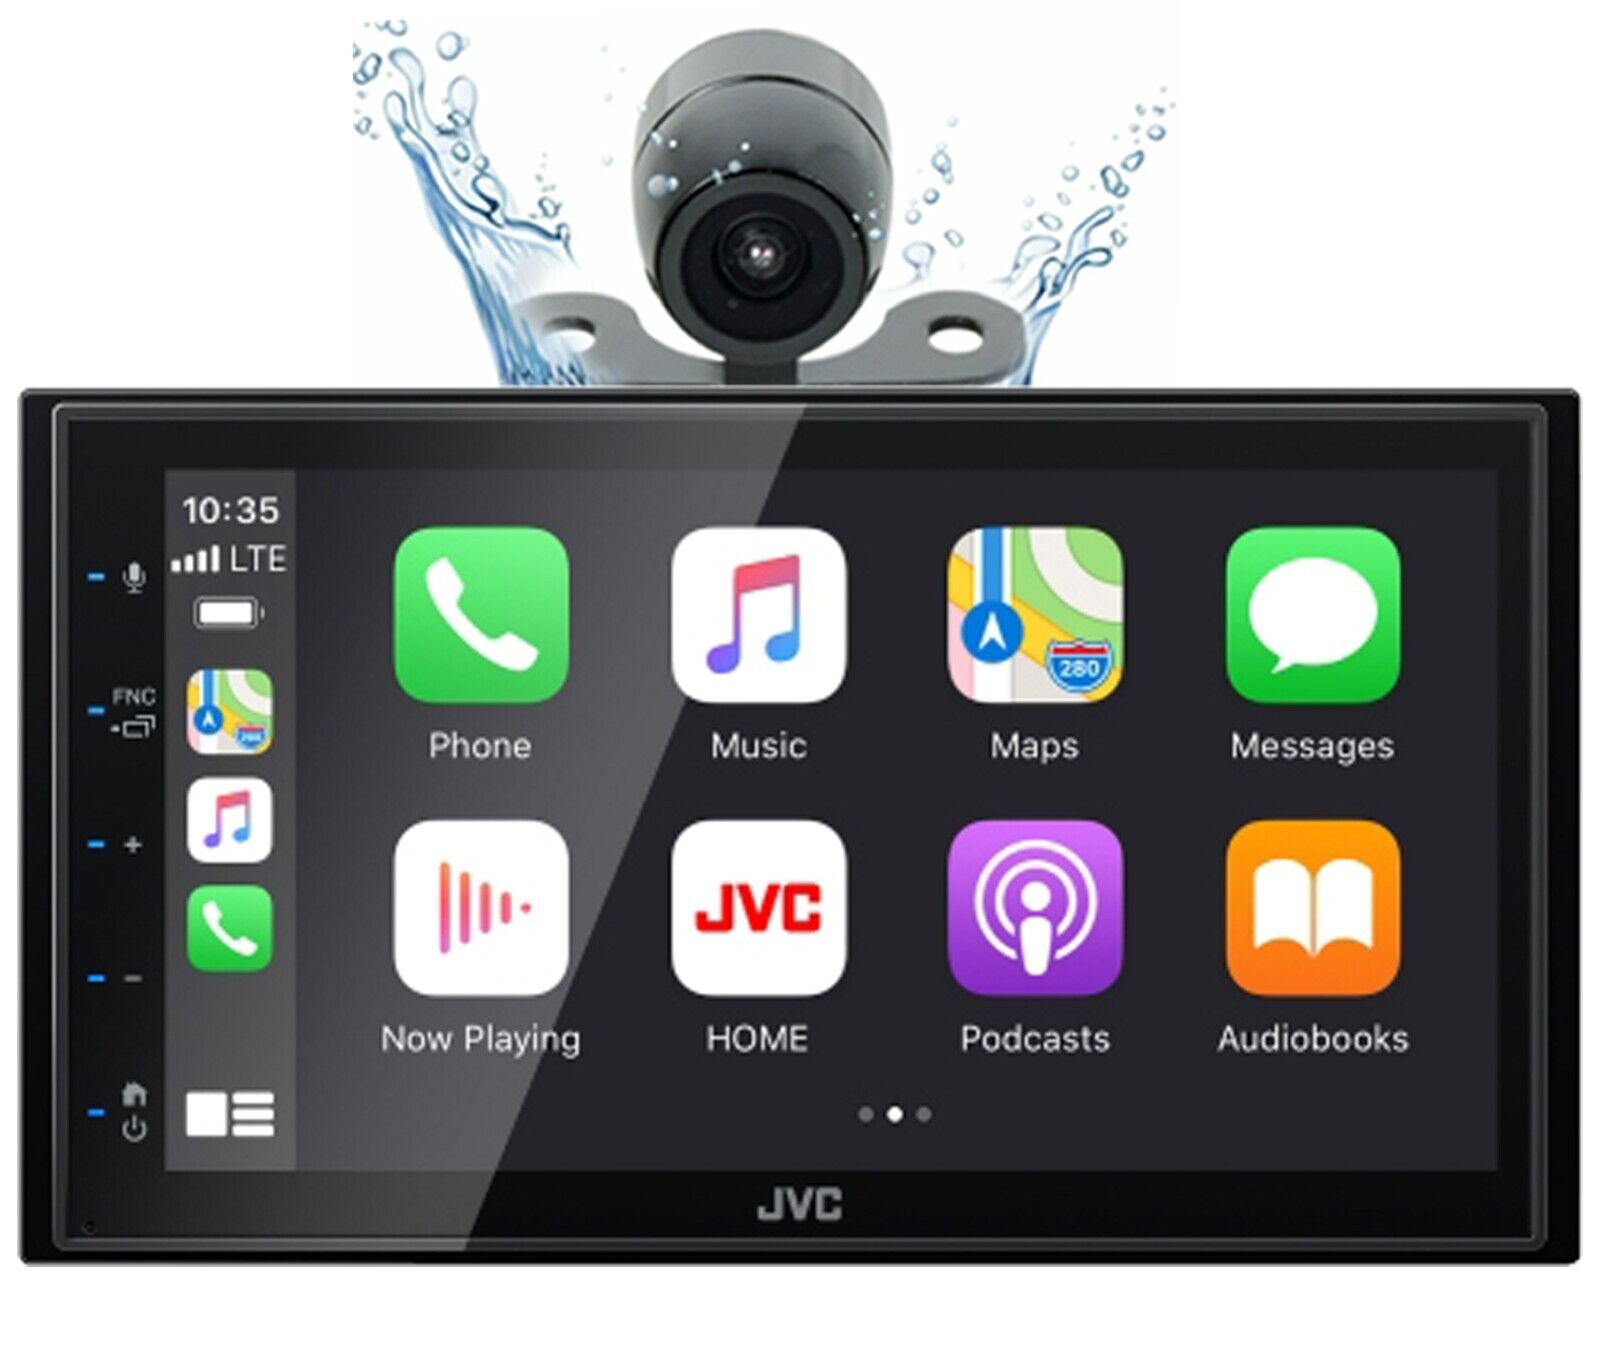 JVC KW-M180BT 2 DIN 6.75" Media Player USB Mirroring For Android Bluetooth + Backup Camera